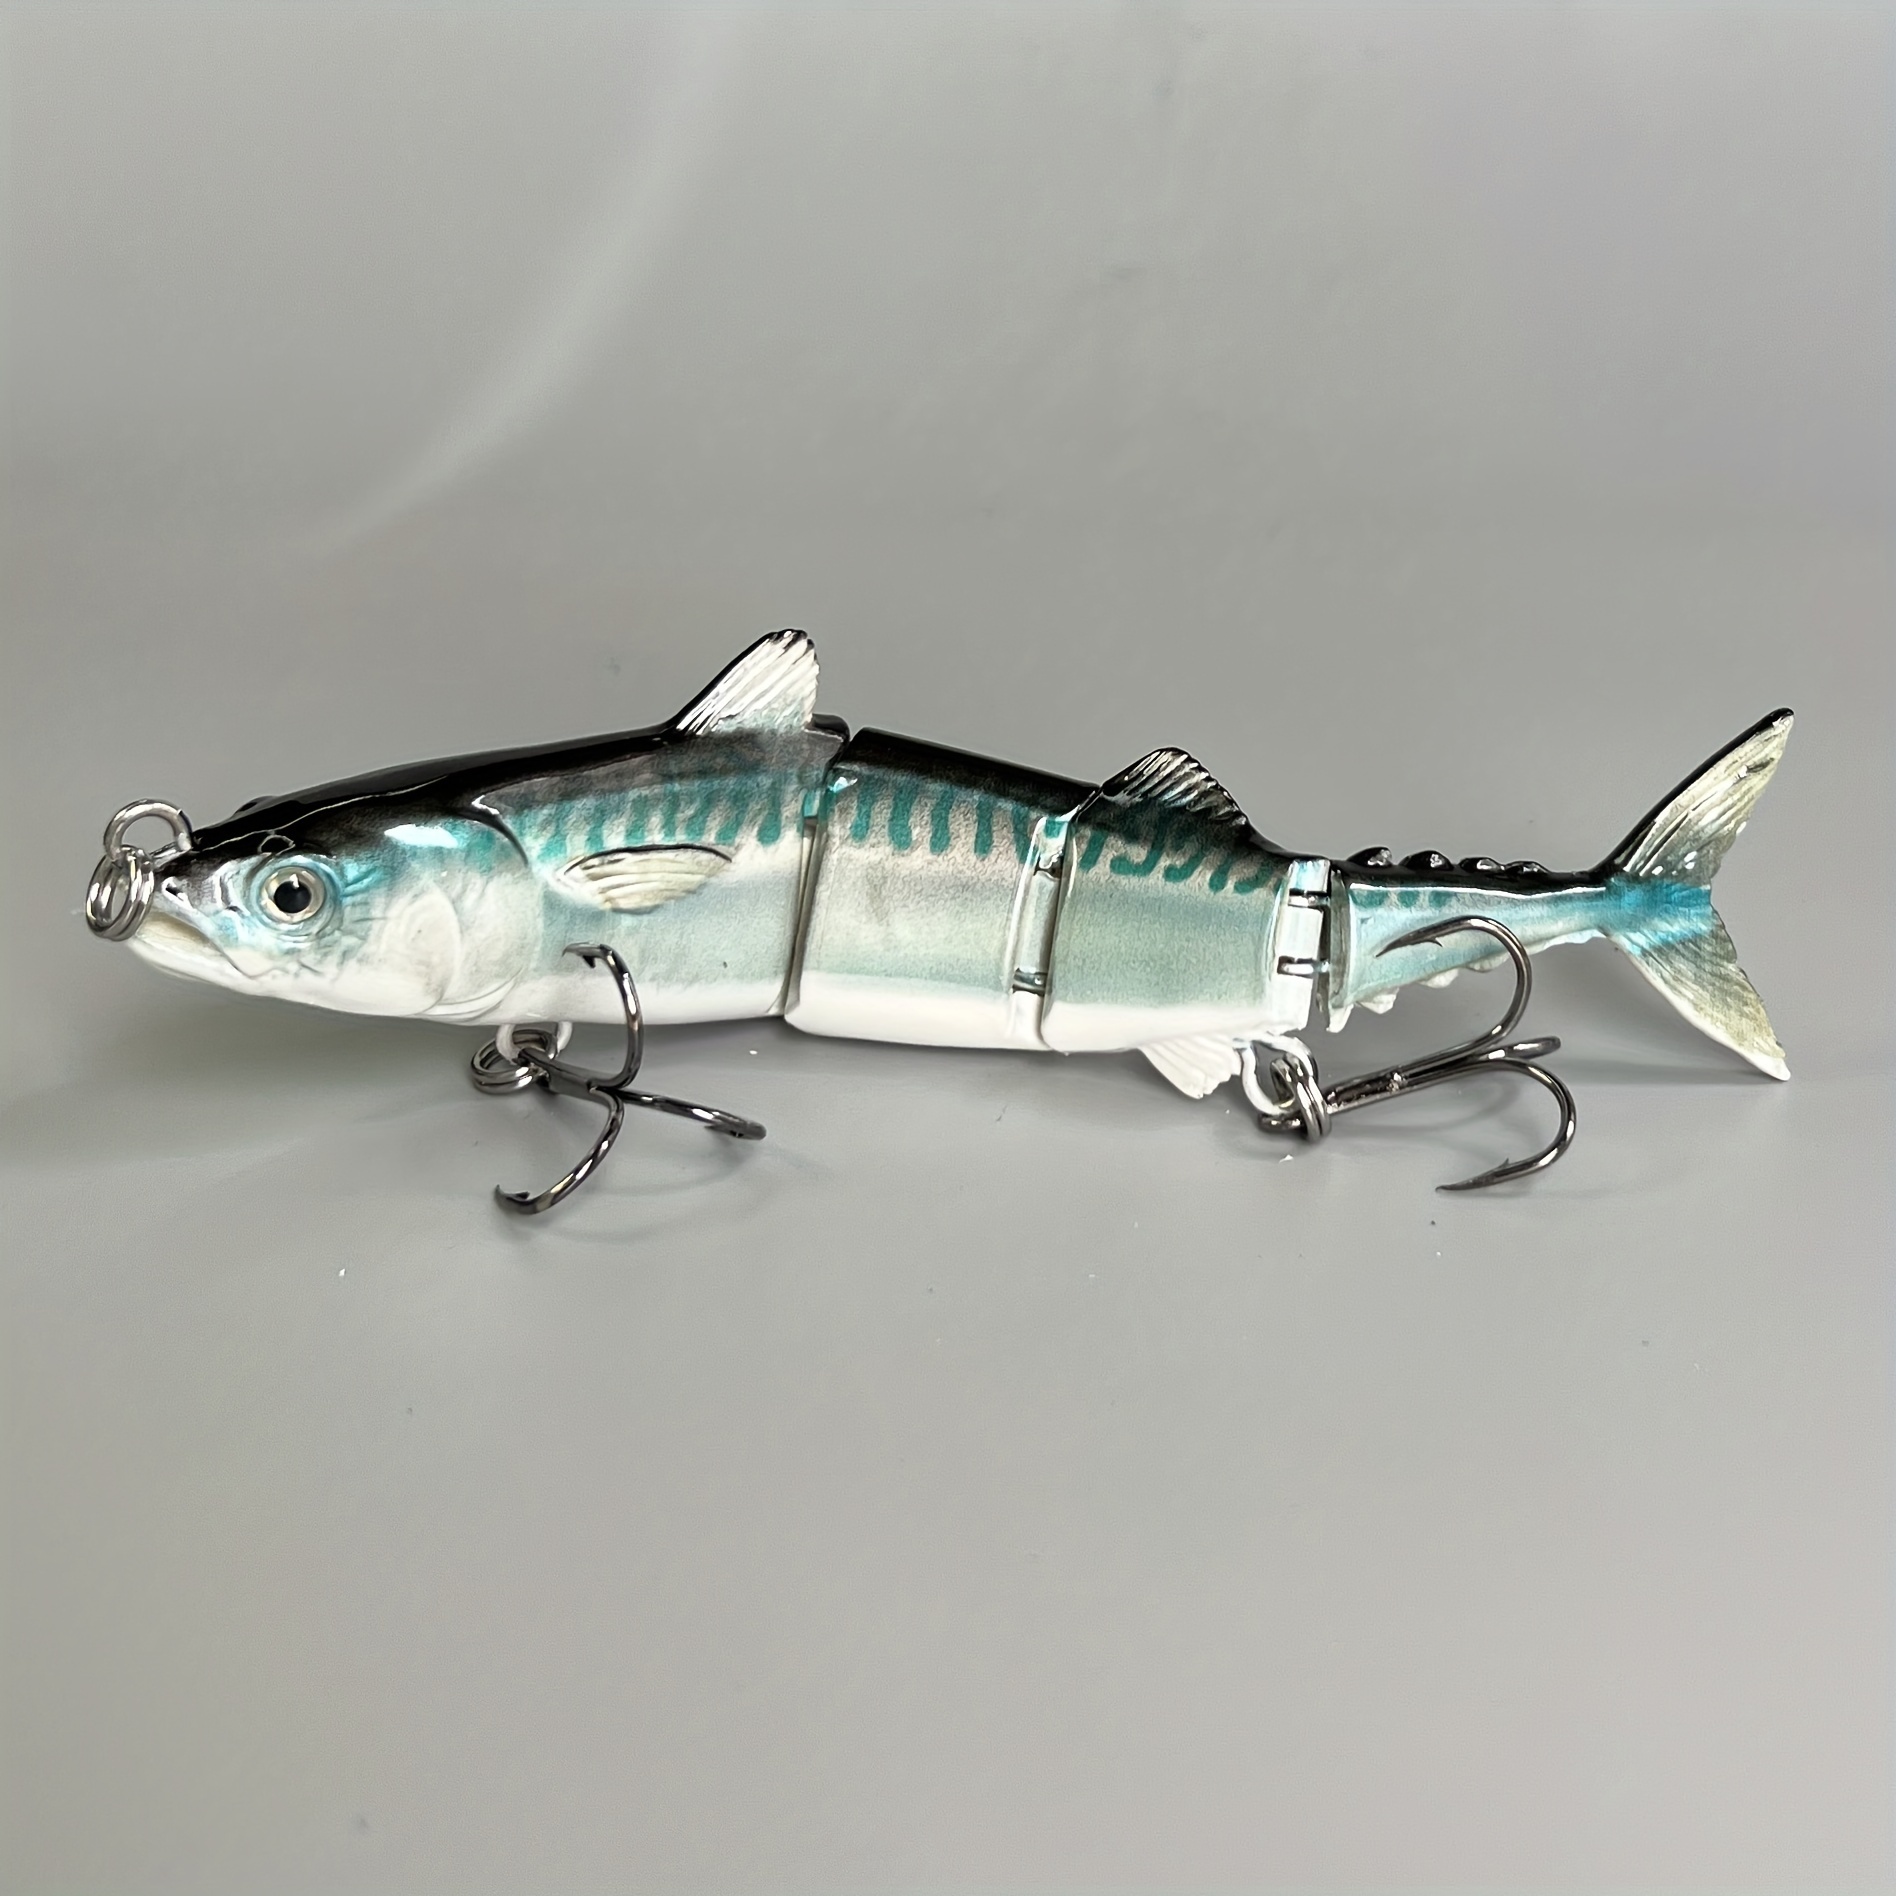 1pc 15cm/33g Artificial Bionic Wobbler Fishing Lure, 5.91in/1.16oz Sinking  Multi Jointed Hard Bait, Fishing Accessories